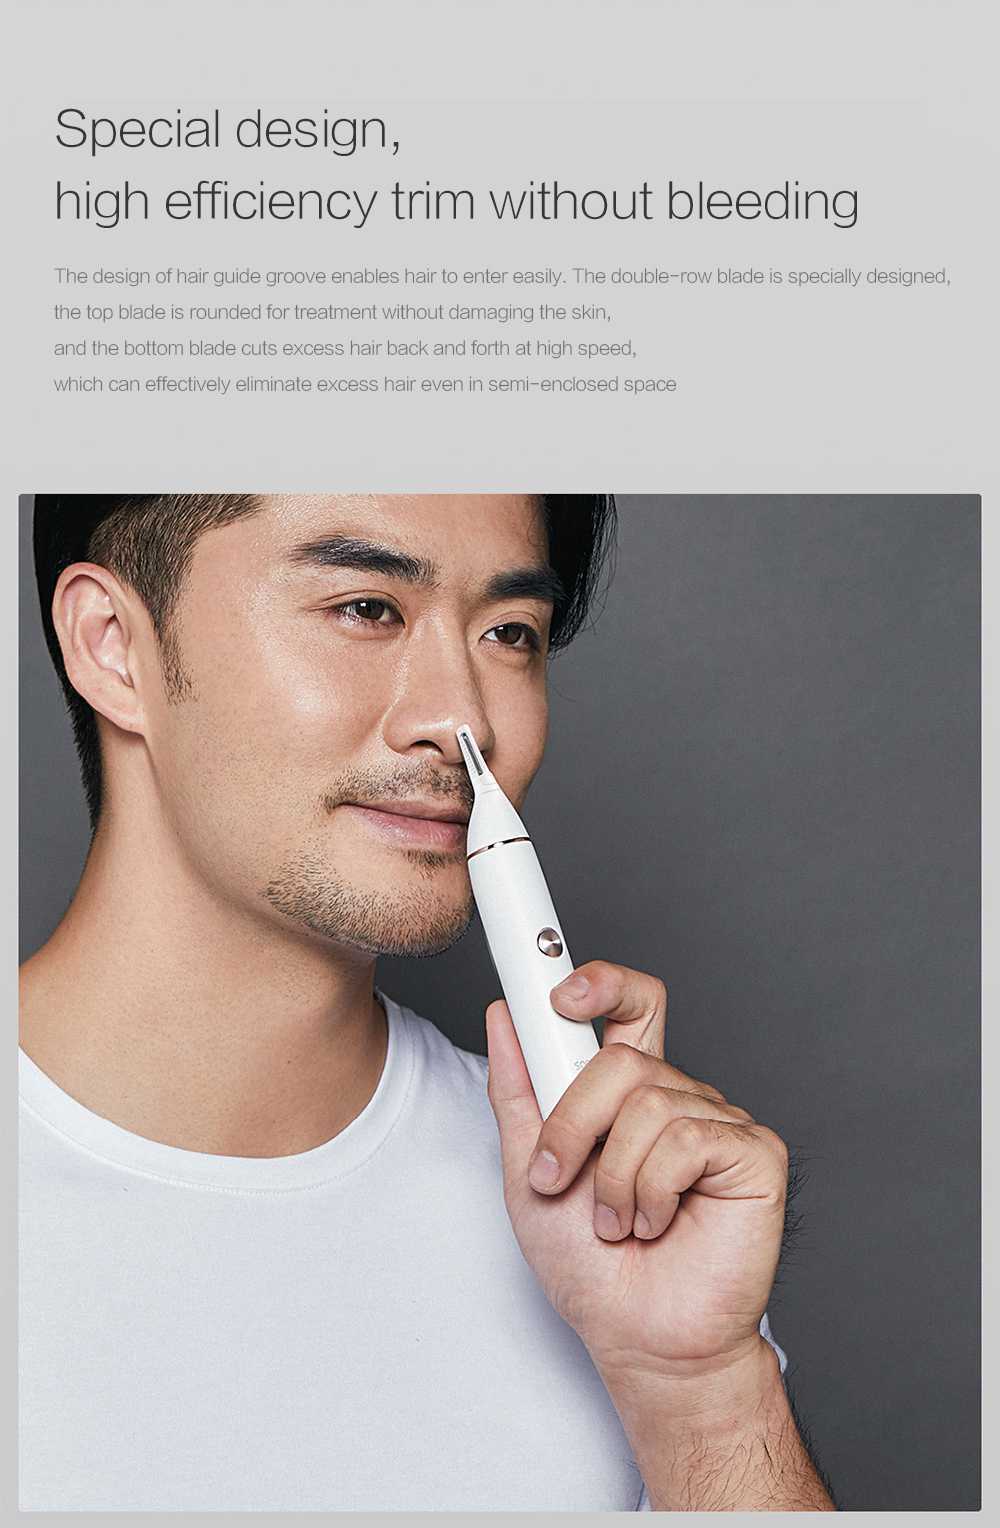 Xiaomi Youpin SOOCAS N1 Washable Nose Hair Trimmer